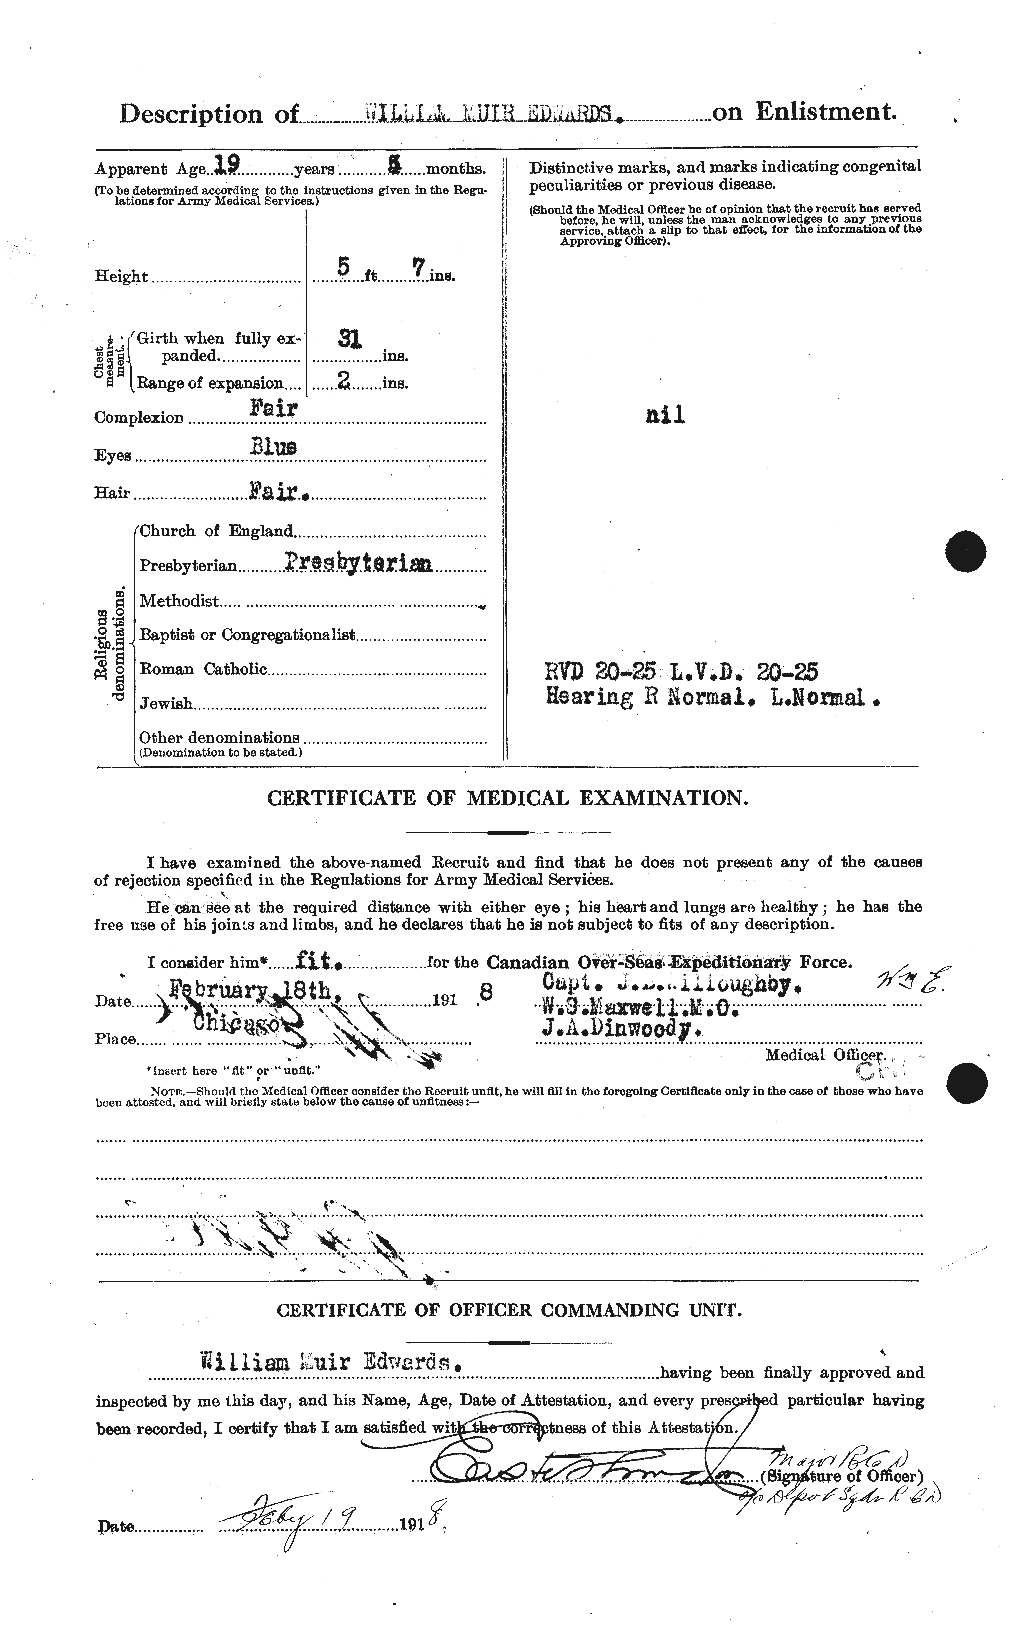 Personnel Records of the First World War - CEF 311933b